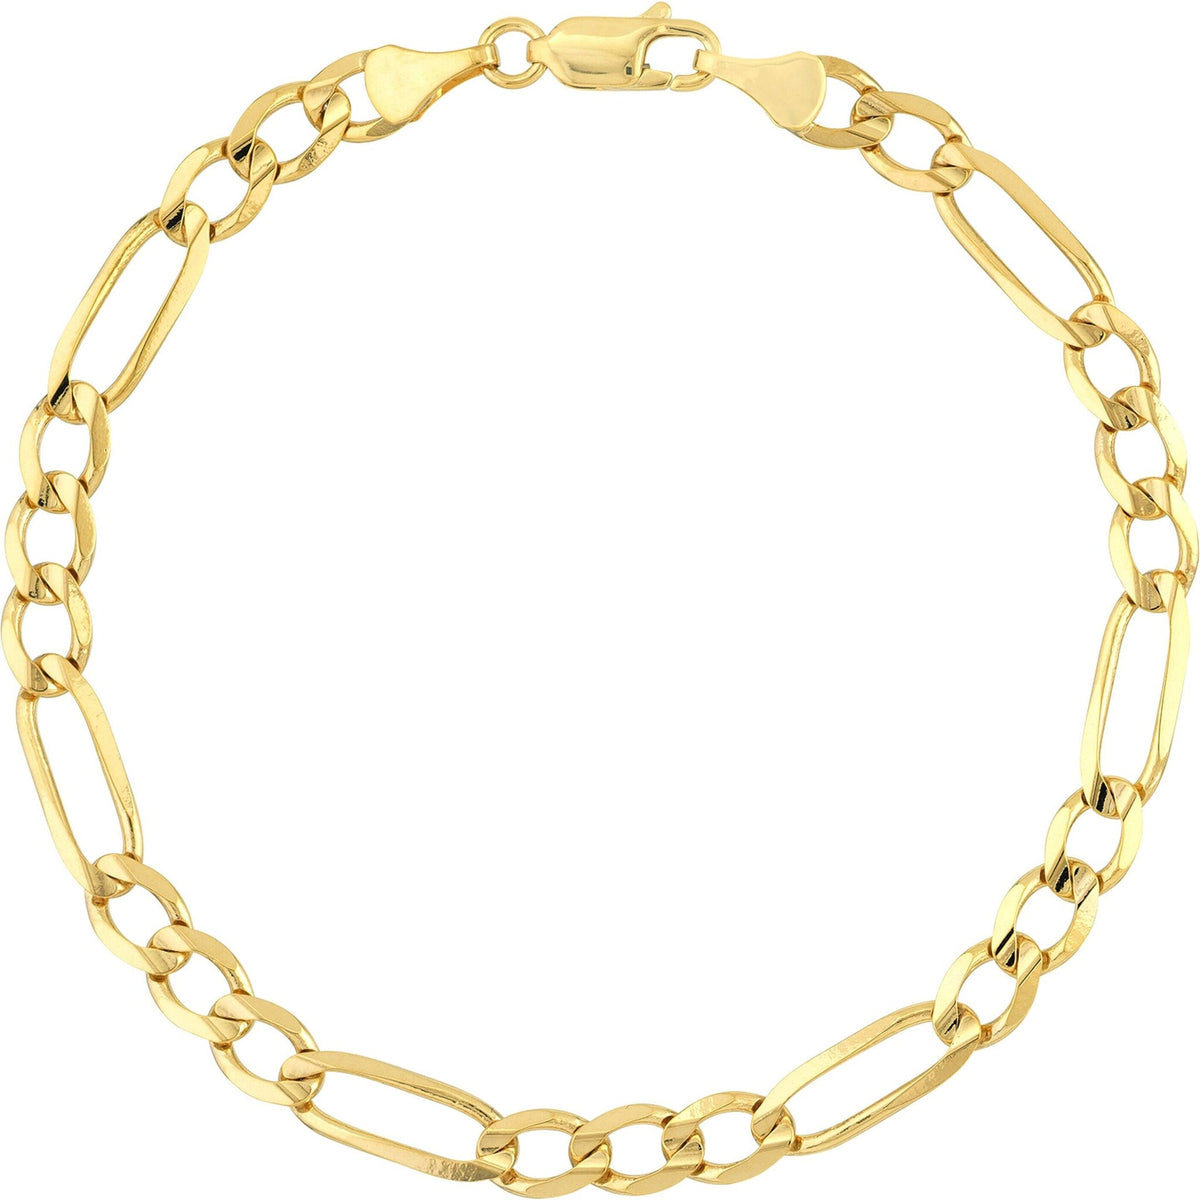 Elegant Figaro chain necklace from Robinson's Jewelers